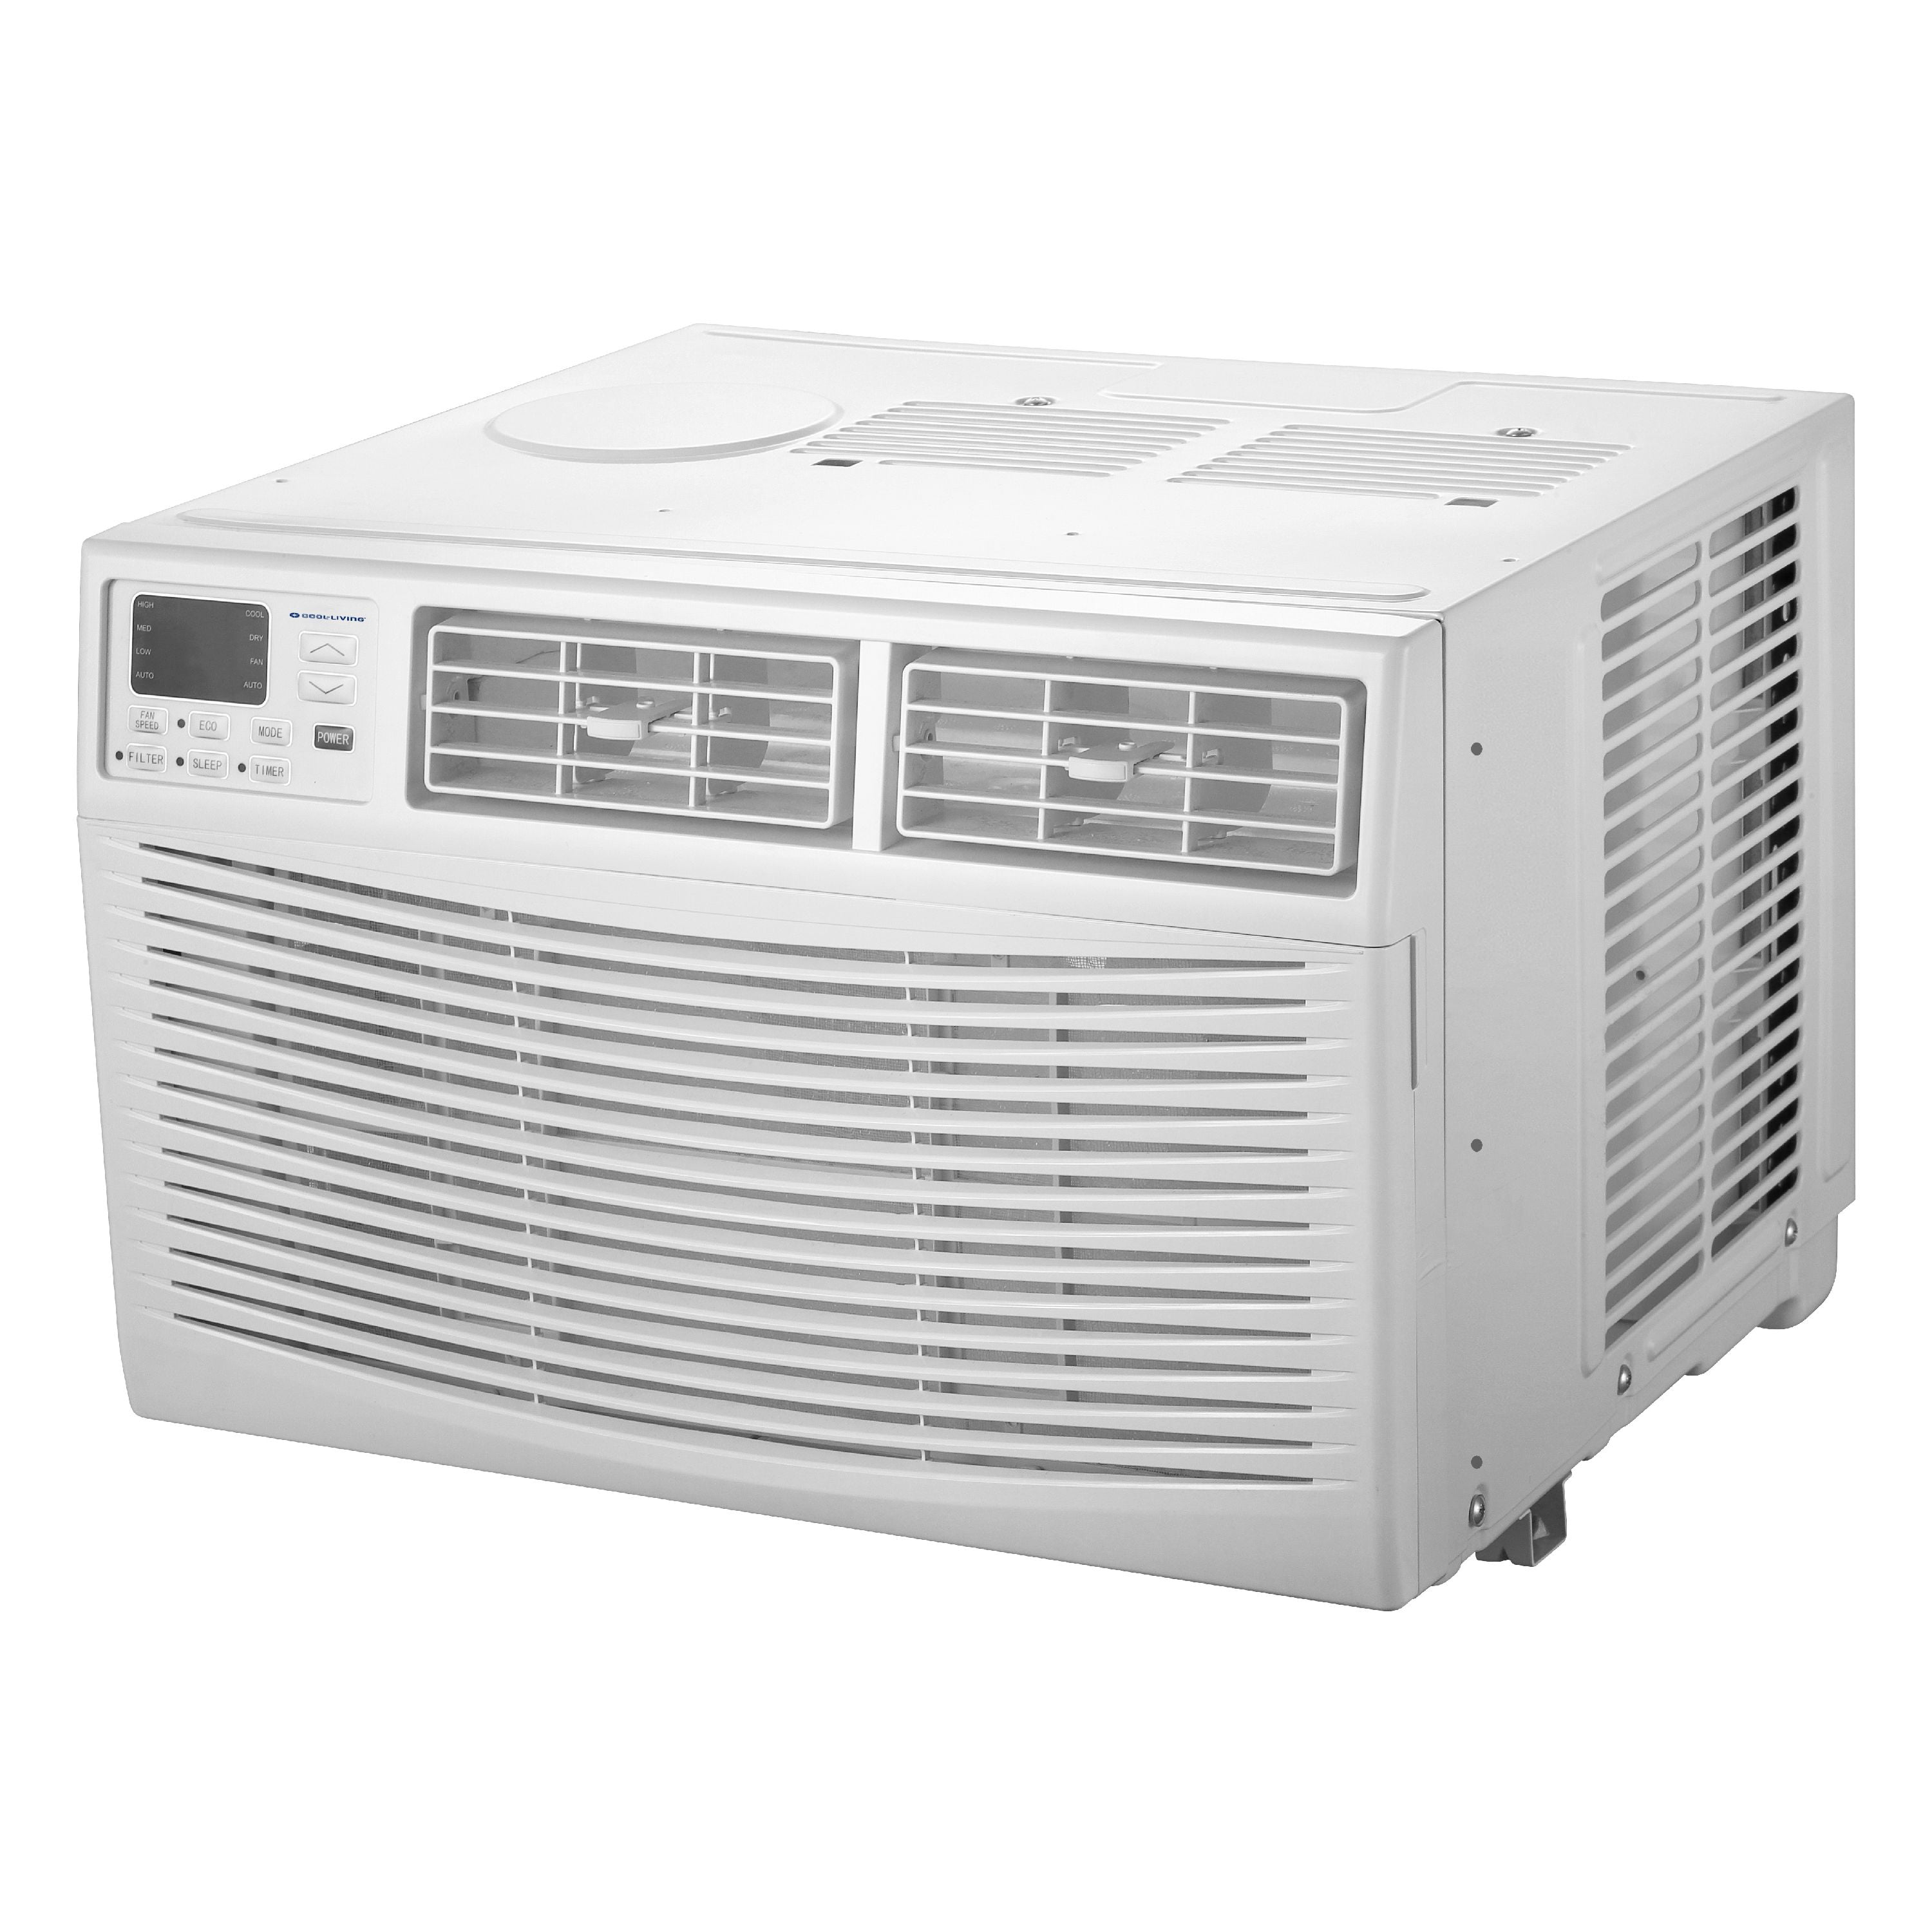 CoolLiving 18,000 BTU Window Room Air Conditioner with Remote, 220V